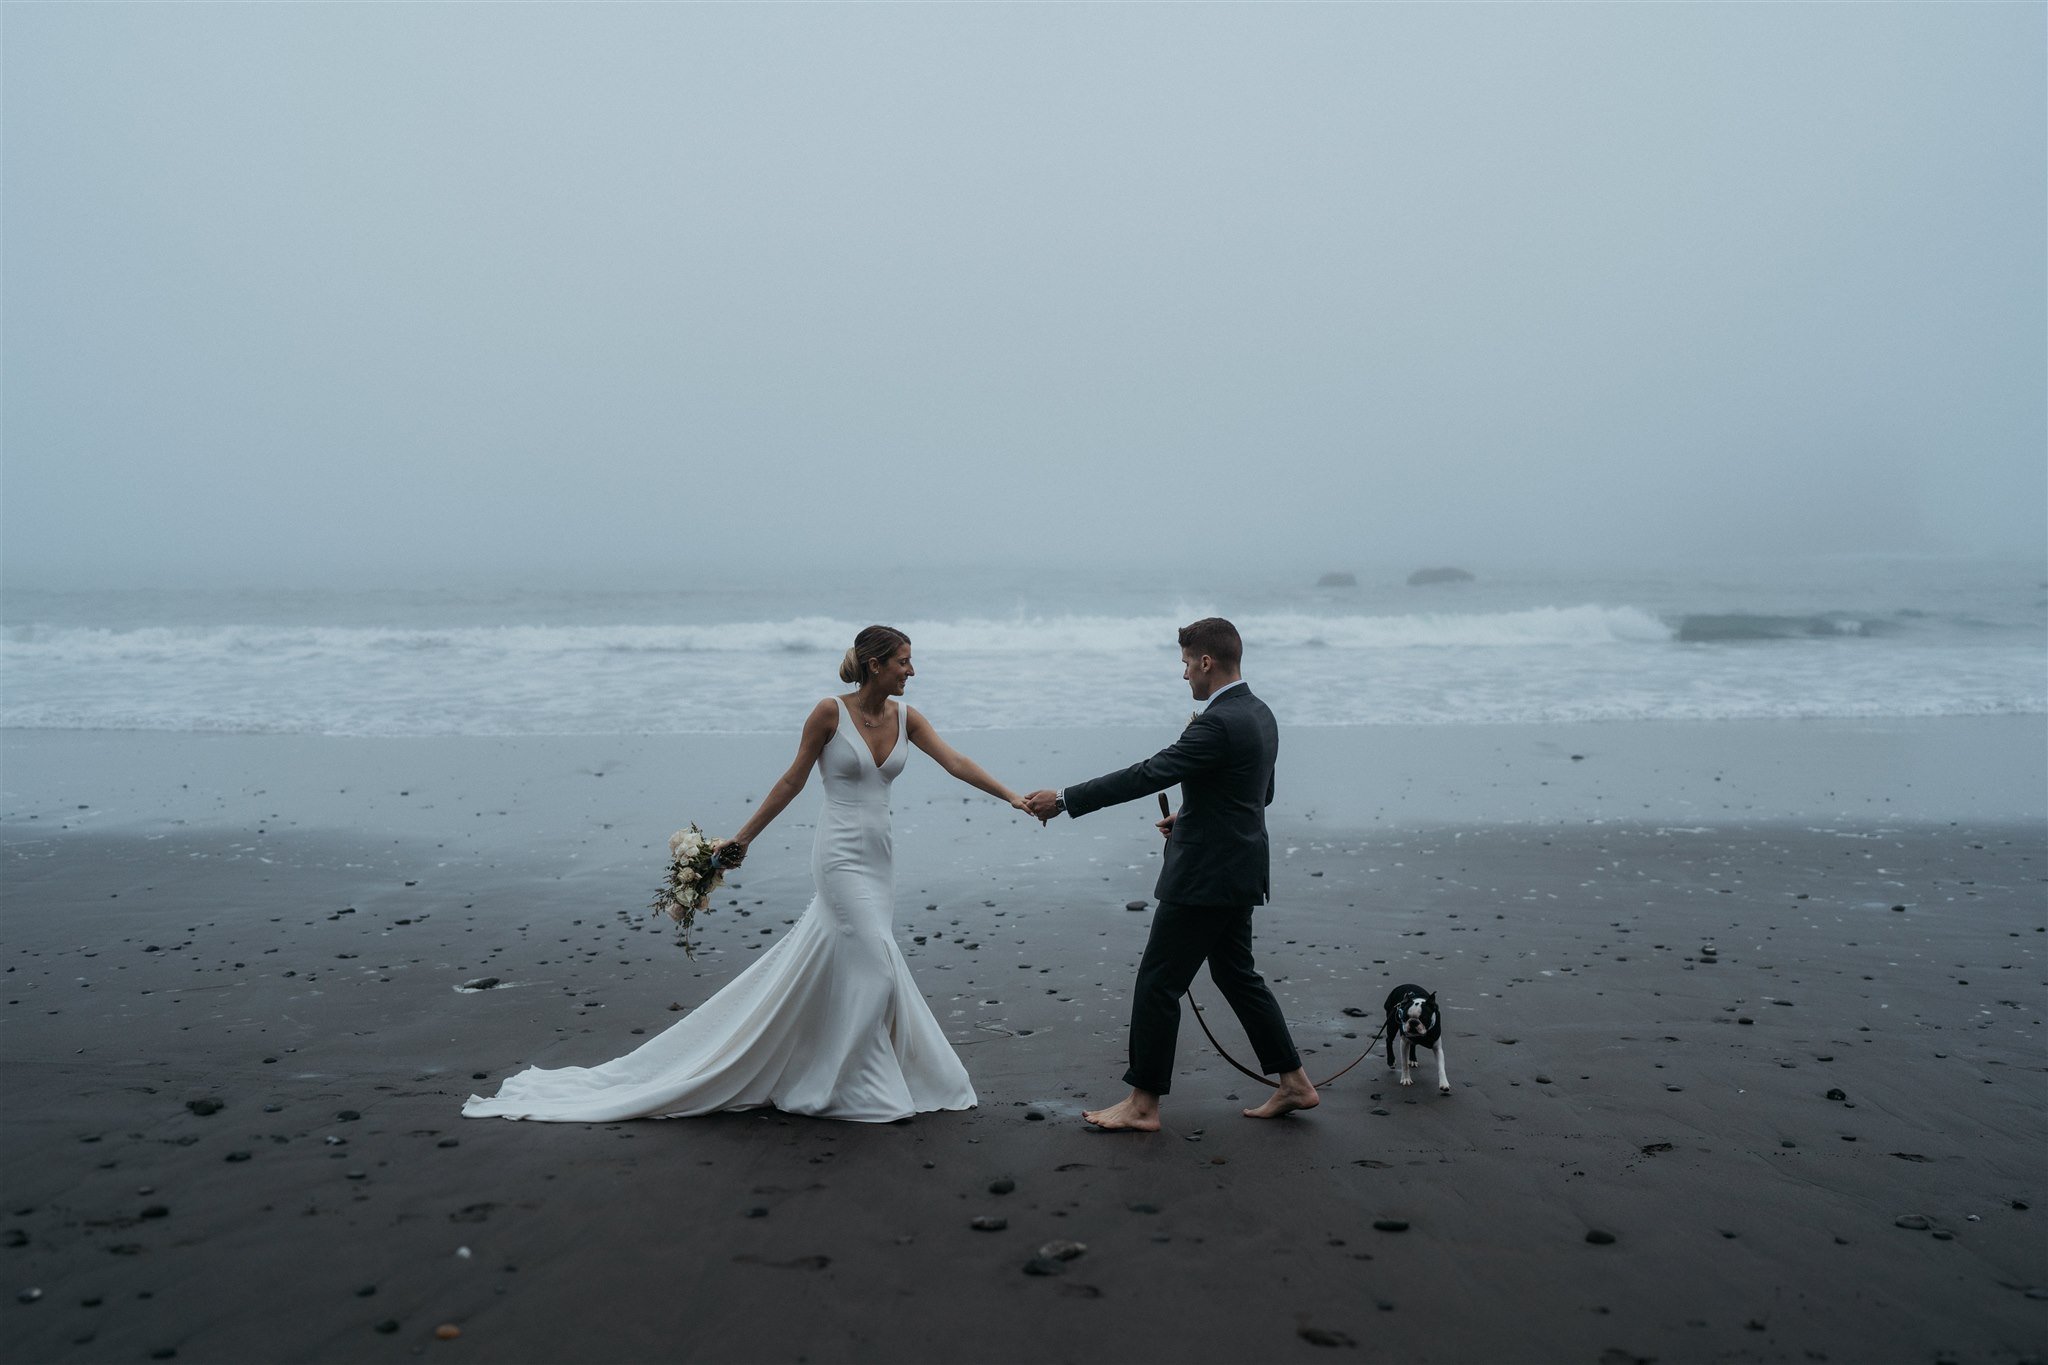 Bride and groom holding hands twirling on the beach on the Southern Oregon Coast